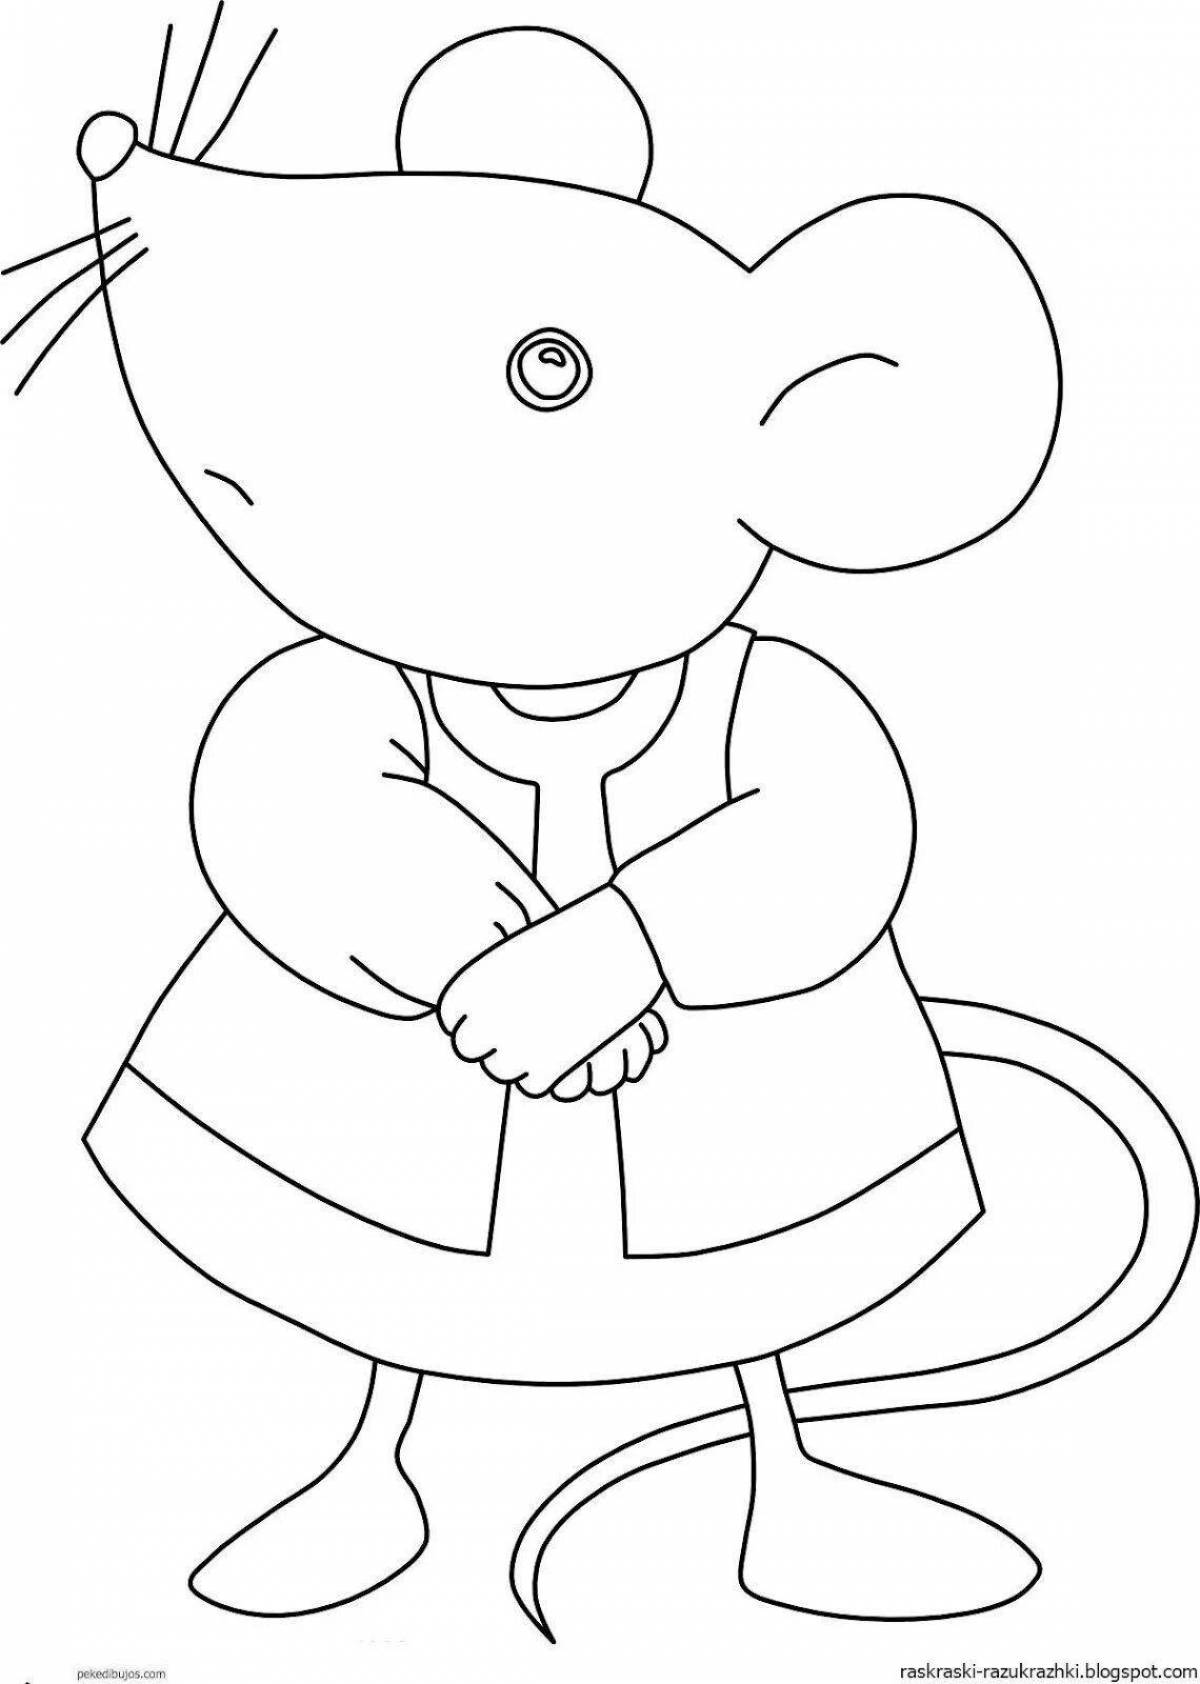 Cute mouse tim coloring